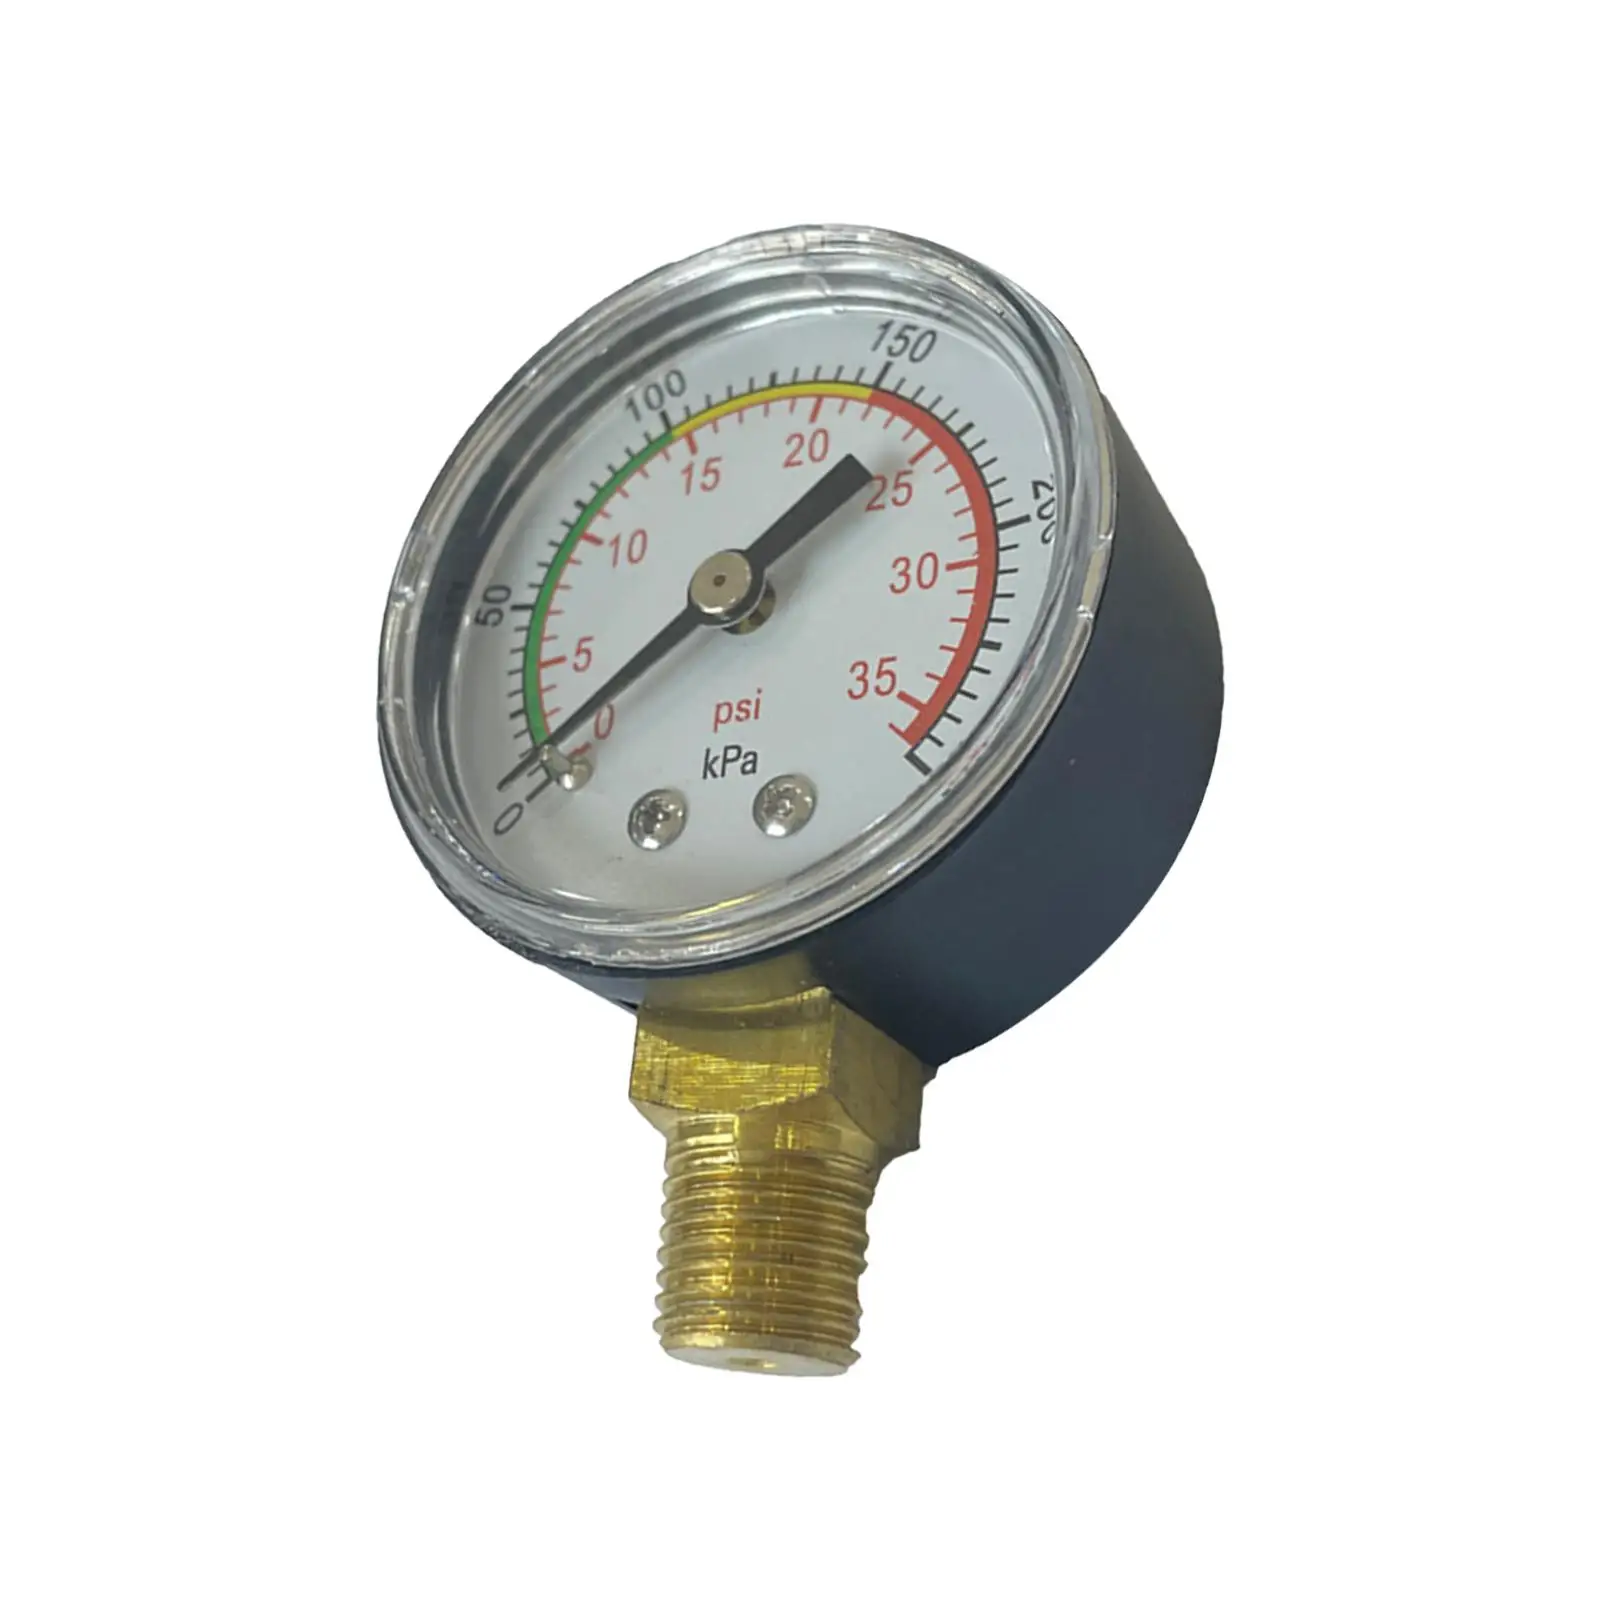 Pressure Gauge for Swimming Pool Accuracy Lightweight Dual Scale Dial Display Pool Sand Filter Pressure Gauge for Hot Tubs Accs